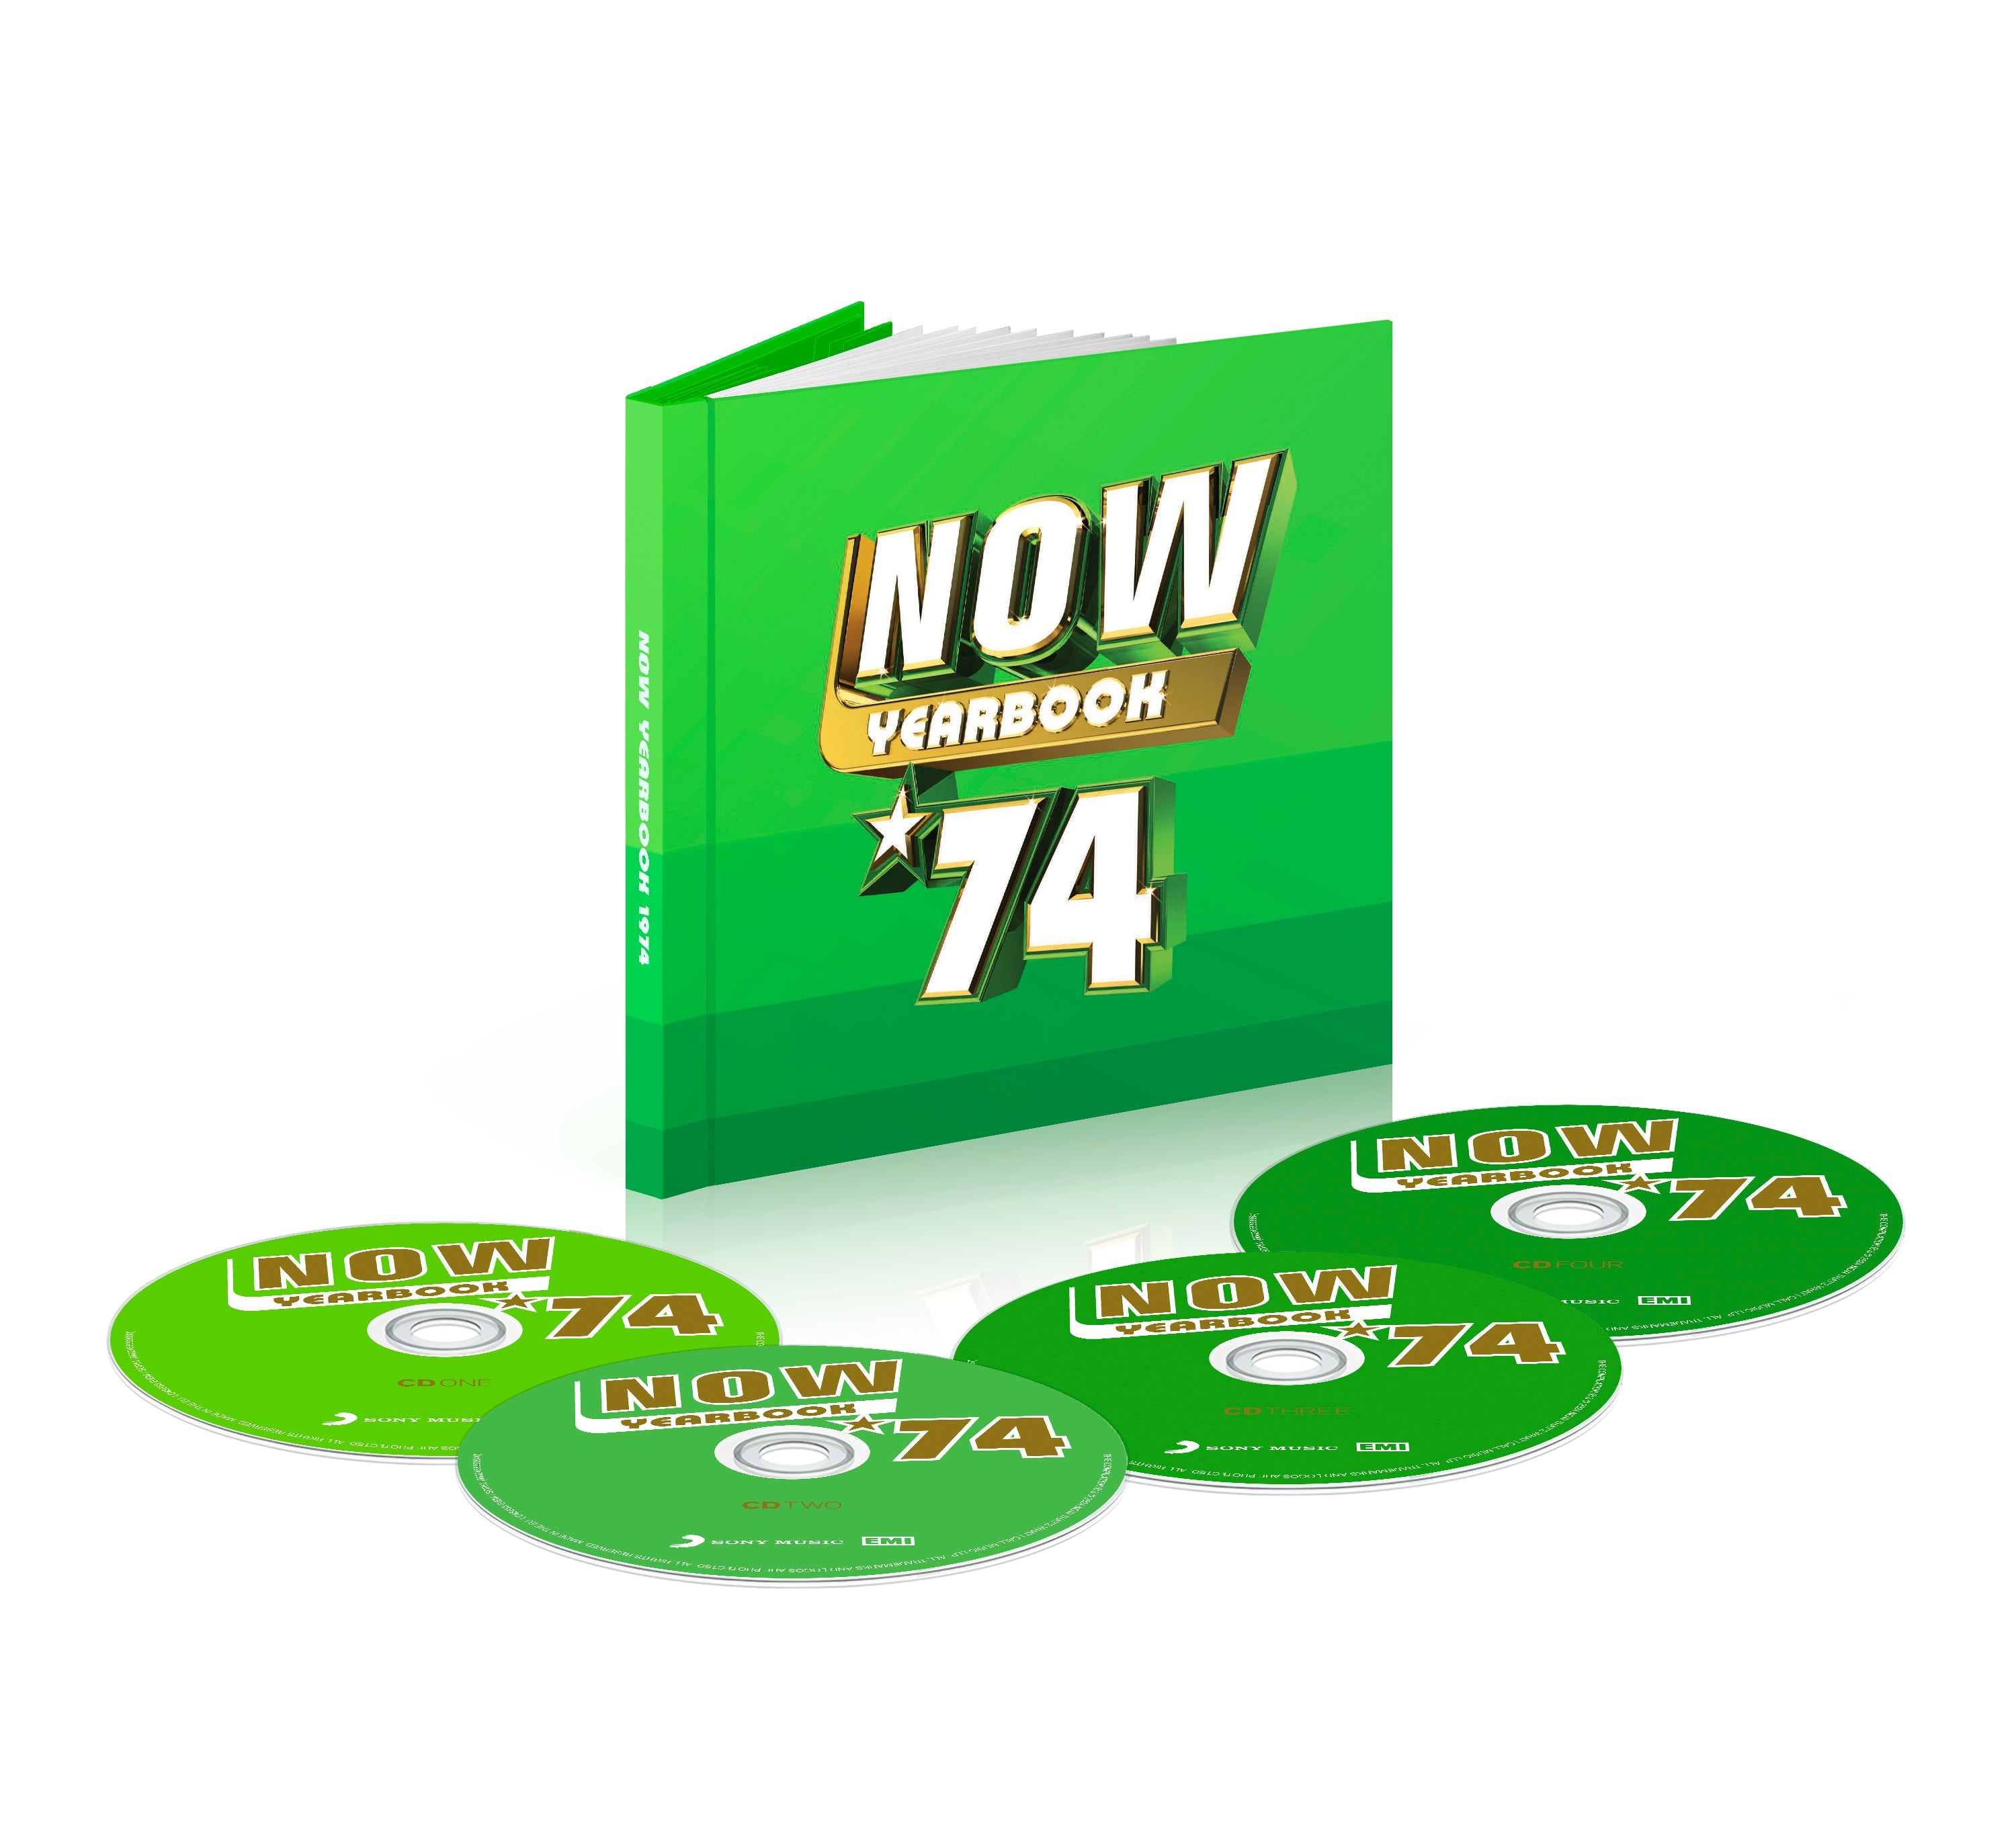 NOW – Yearbook 1974: Special Edition 4CD + Limited Numbered 5" Print